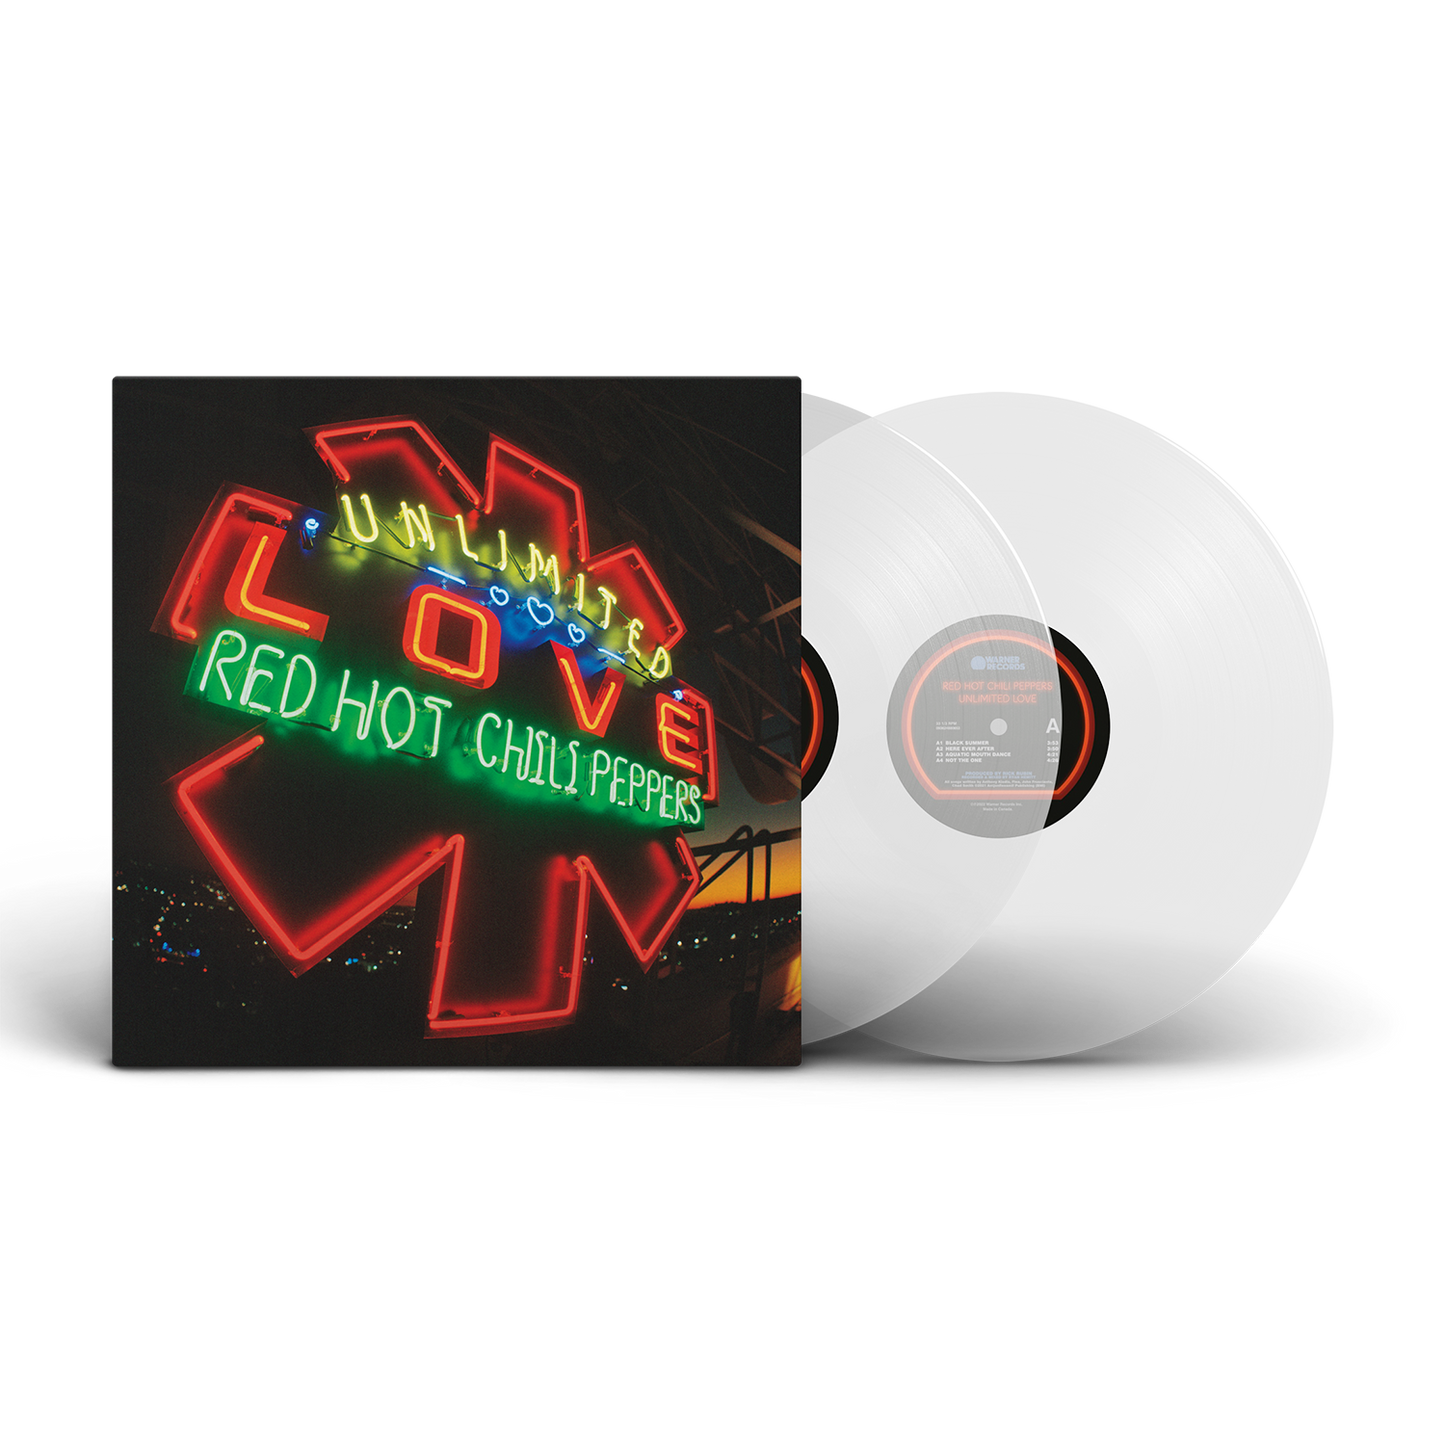 Unlimited Love Store Exclusive Clear Vinyl – Red Hot Chili Peppers